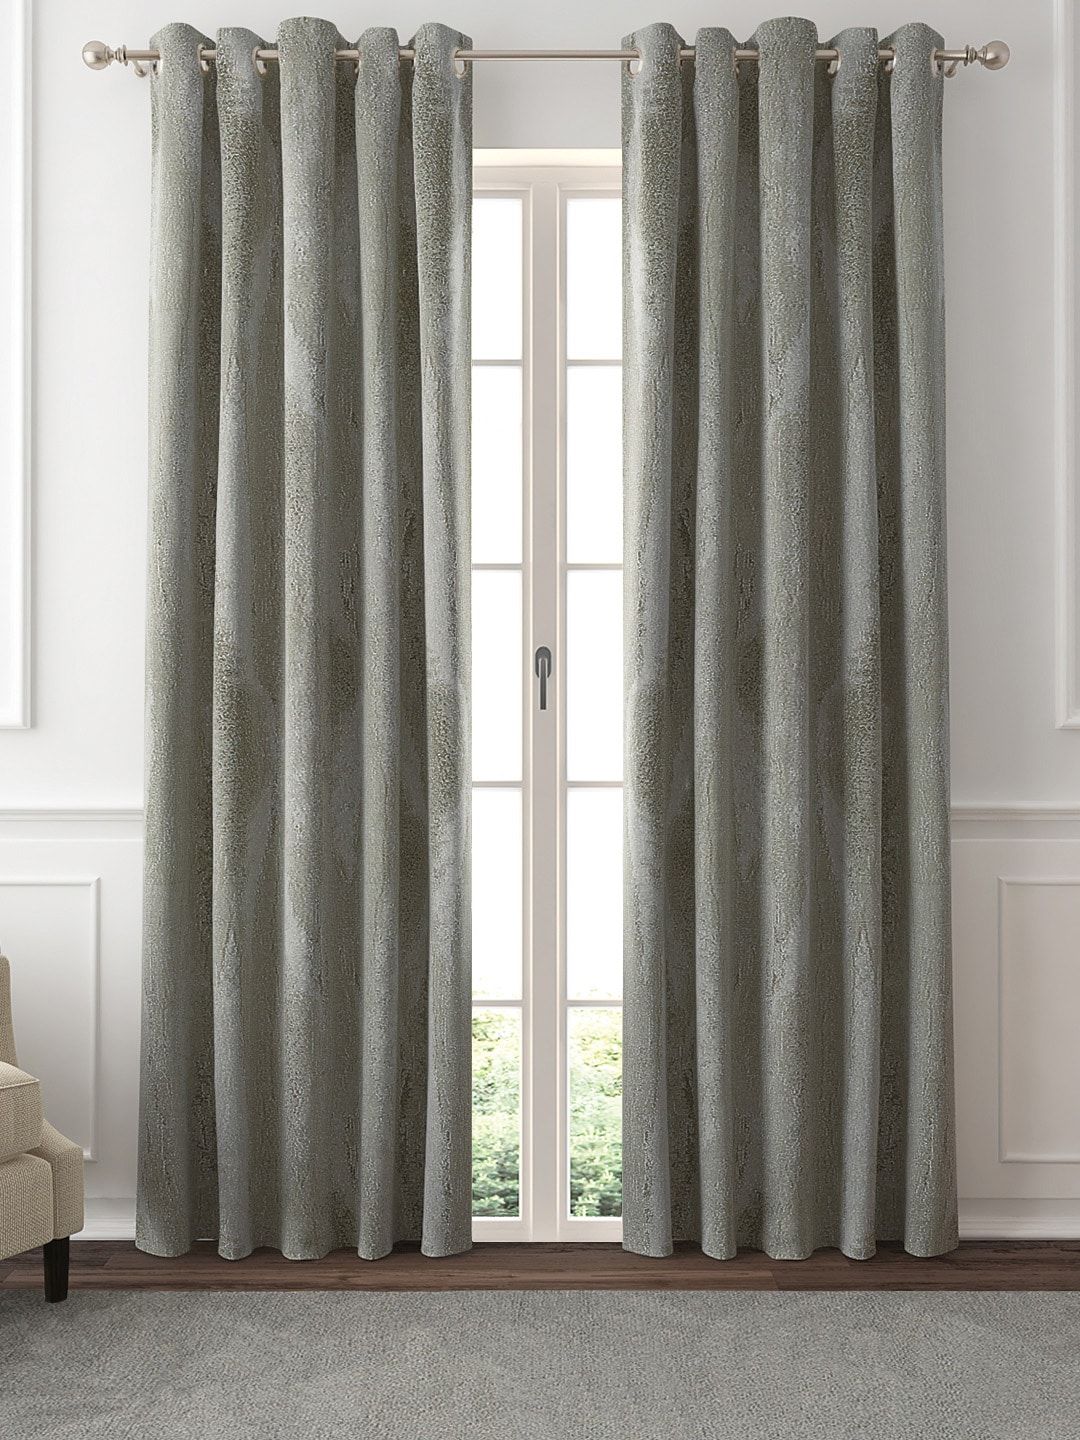 GM Set Of 2 Green Self-Design Black Out Door Curtains Price in India